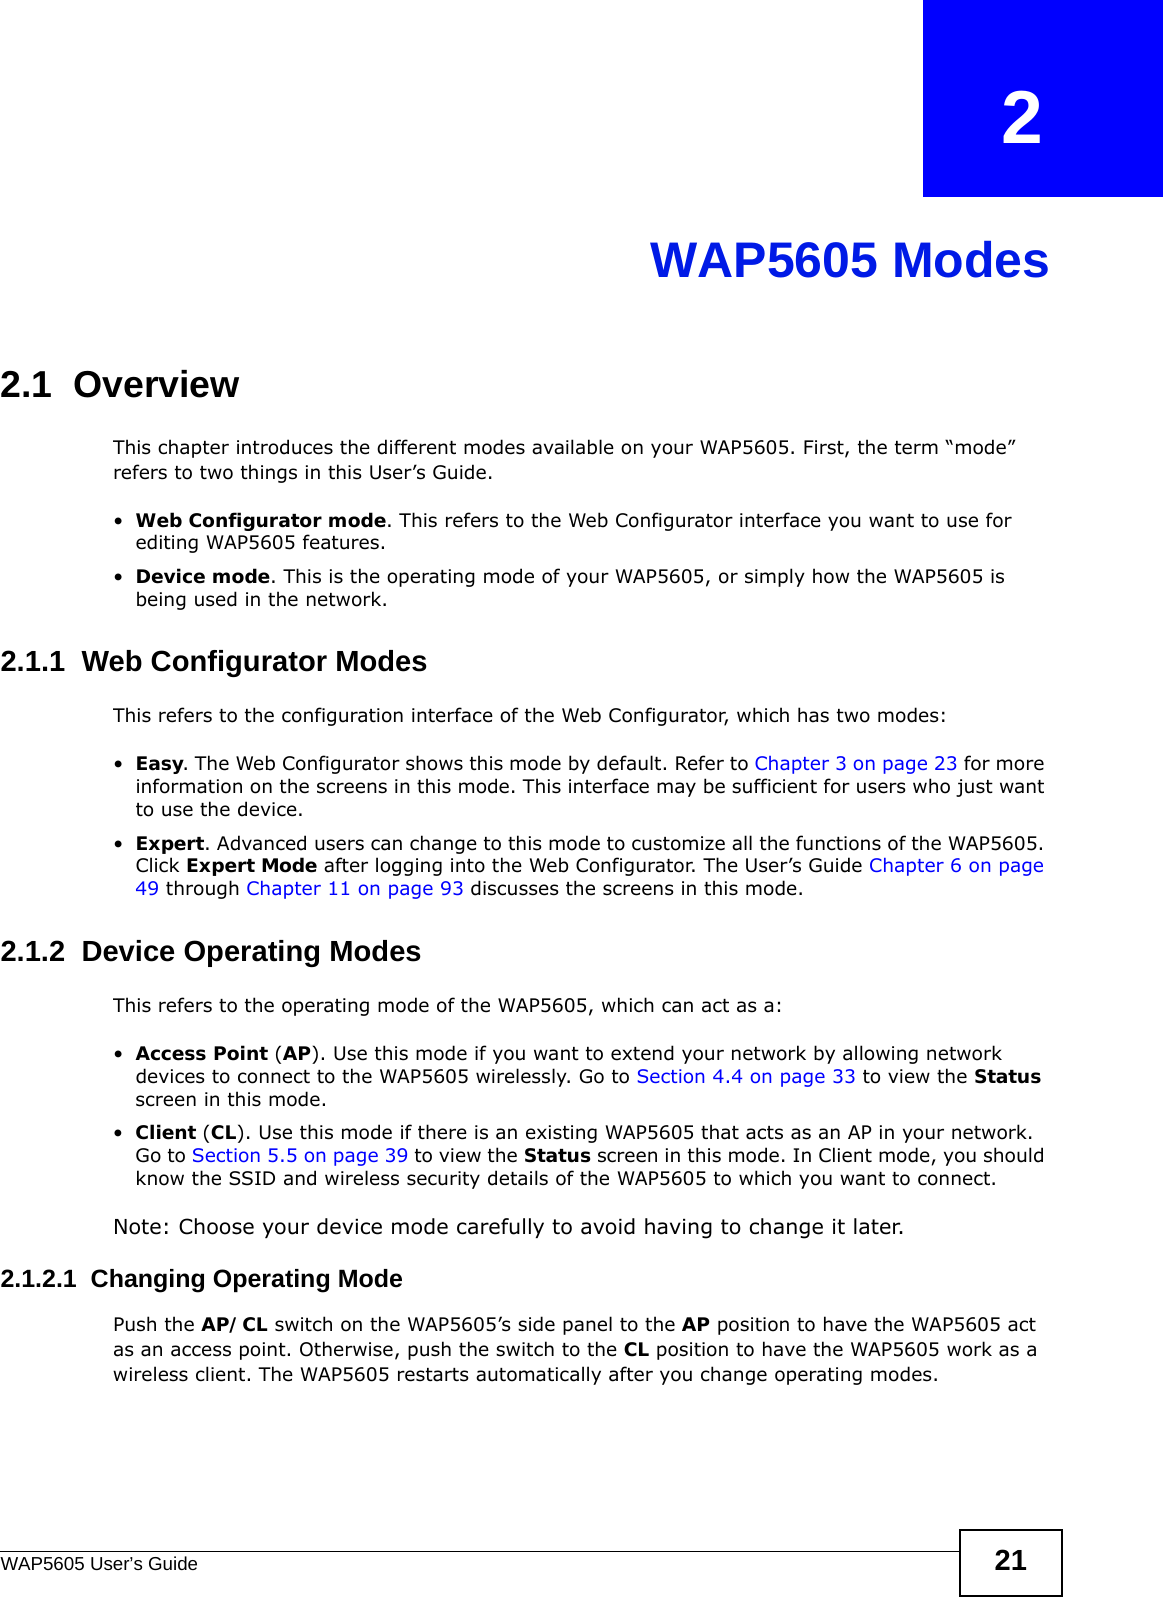 WAP5605 User’s Guide 21CHAPTER   2WAP5605 Modes2.1  OverviewThis chapter introduces the different modes available on your WAP5605. First, the term “mode” refers to two things in this User’s Guide.•Web Configurator mode. This refers to the Web Configurator interface you want to use for editing WAP5605 features. •Device mode. This is the operating mode of your WAP5605, or simply how the WAP5605 is being used in the network. 2.1.1  Web Configurator ModesThis refers to the configuration interface of the Web Configurator, which has two modes:•Easy. The Web Configurator shows this mode by default. Refer to Chapter 3 on page 23 for more information on the screens in this mode. This interface may be sufficient for users who just want to use the device.•Expert. Advanced users can change to this mode to customize all the functions of the WAP5605. Click Expert Mode after logging into the Web Configurator. The User’s Guide Chapter 6 on page 49 through Chapter 11 on page 93 discusses the screens in this mode.2.1.2  Device Operating ModesThis refers to the operating mode of the WAP5605, which can act as a:•Access Point (AP). Use this mode if you want to extend your network by allowing network devices to connect to the WAP5605 wirelessly. Go to Section 4.4 on page 33 to view the Status screen in this mode.•Client (CL). Use this mode if there is an existing WAP5605 that acts as an AP in your network. Go to Section 5.5 on page 39 to view the Status screen in this mode. In Client mode, you should know the SSID and wireless security details of the WAP5605 to which you want to connect.Note: Choose your device mode carefully to avoid having to change it later.2.1.2.1  Changing Operating ModePush the AP/CL switch on the WAP5605’s side panel to the AP position to have the WAP5605 act as an access point. Otherwise, push the switch to the CL position to have the WAP5605 work as a wireless client. The WAP5605 restarts automatically after you change operating modes.